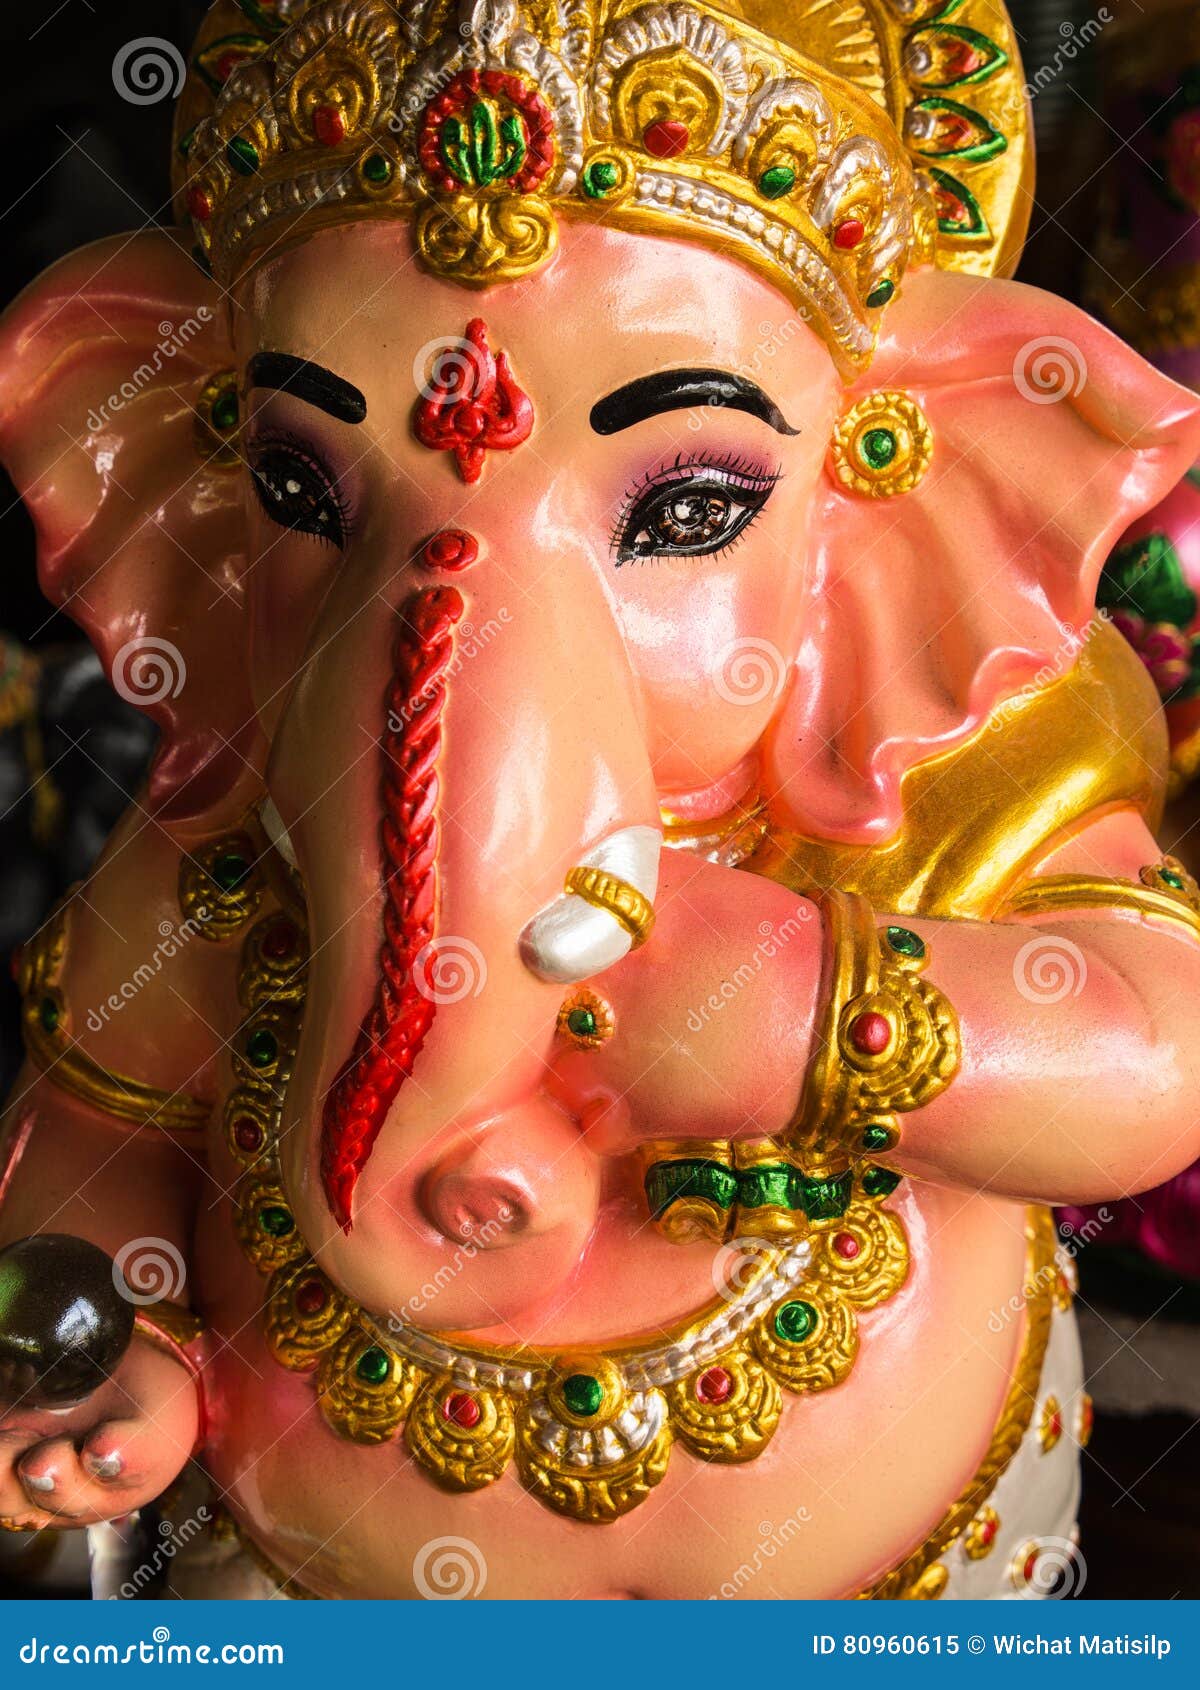 Ganesh Statues in Different Postures Stock Image - Image of animal ...